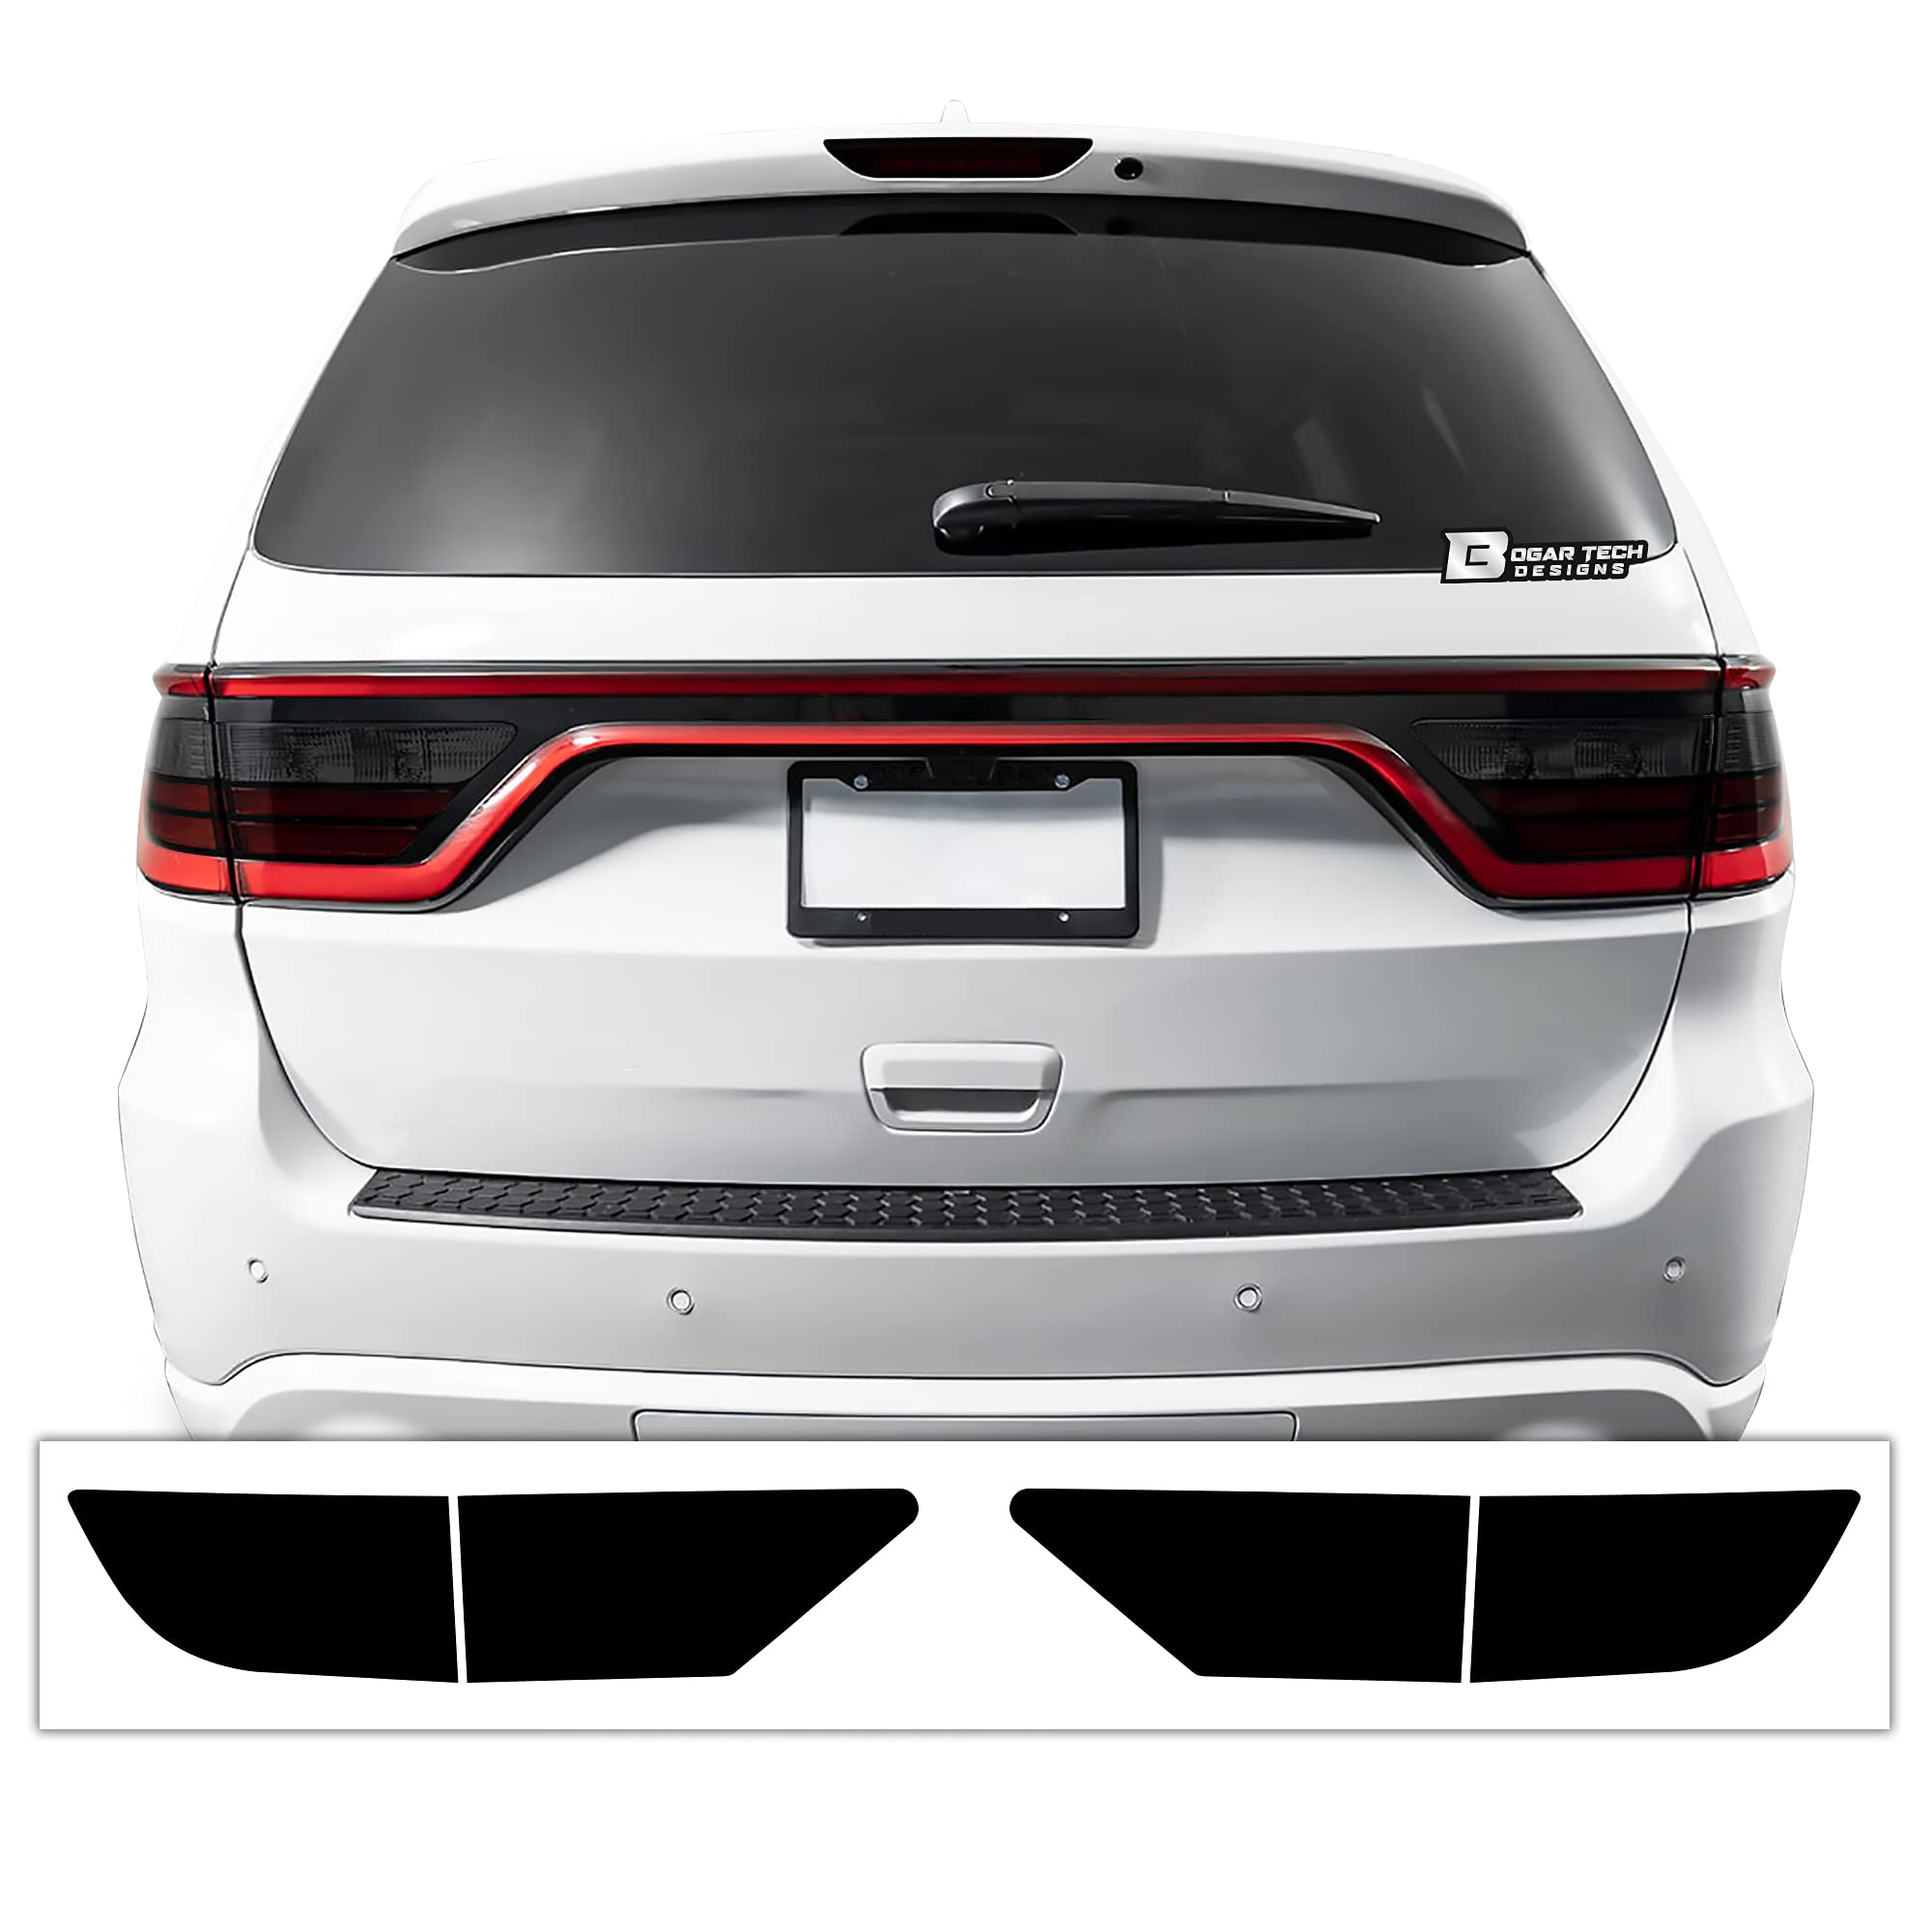 BOGAR TECH DESIGNS Tail Light Tint Kit Compatible with and Fits Dodge  Durango 2014-2022, Dark Smoke